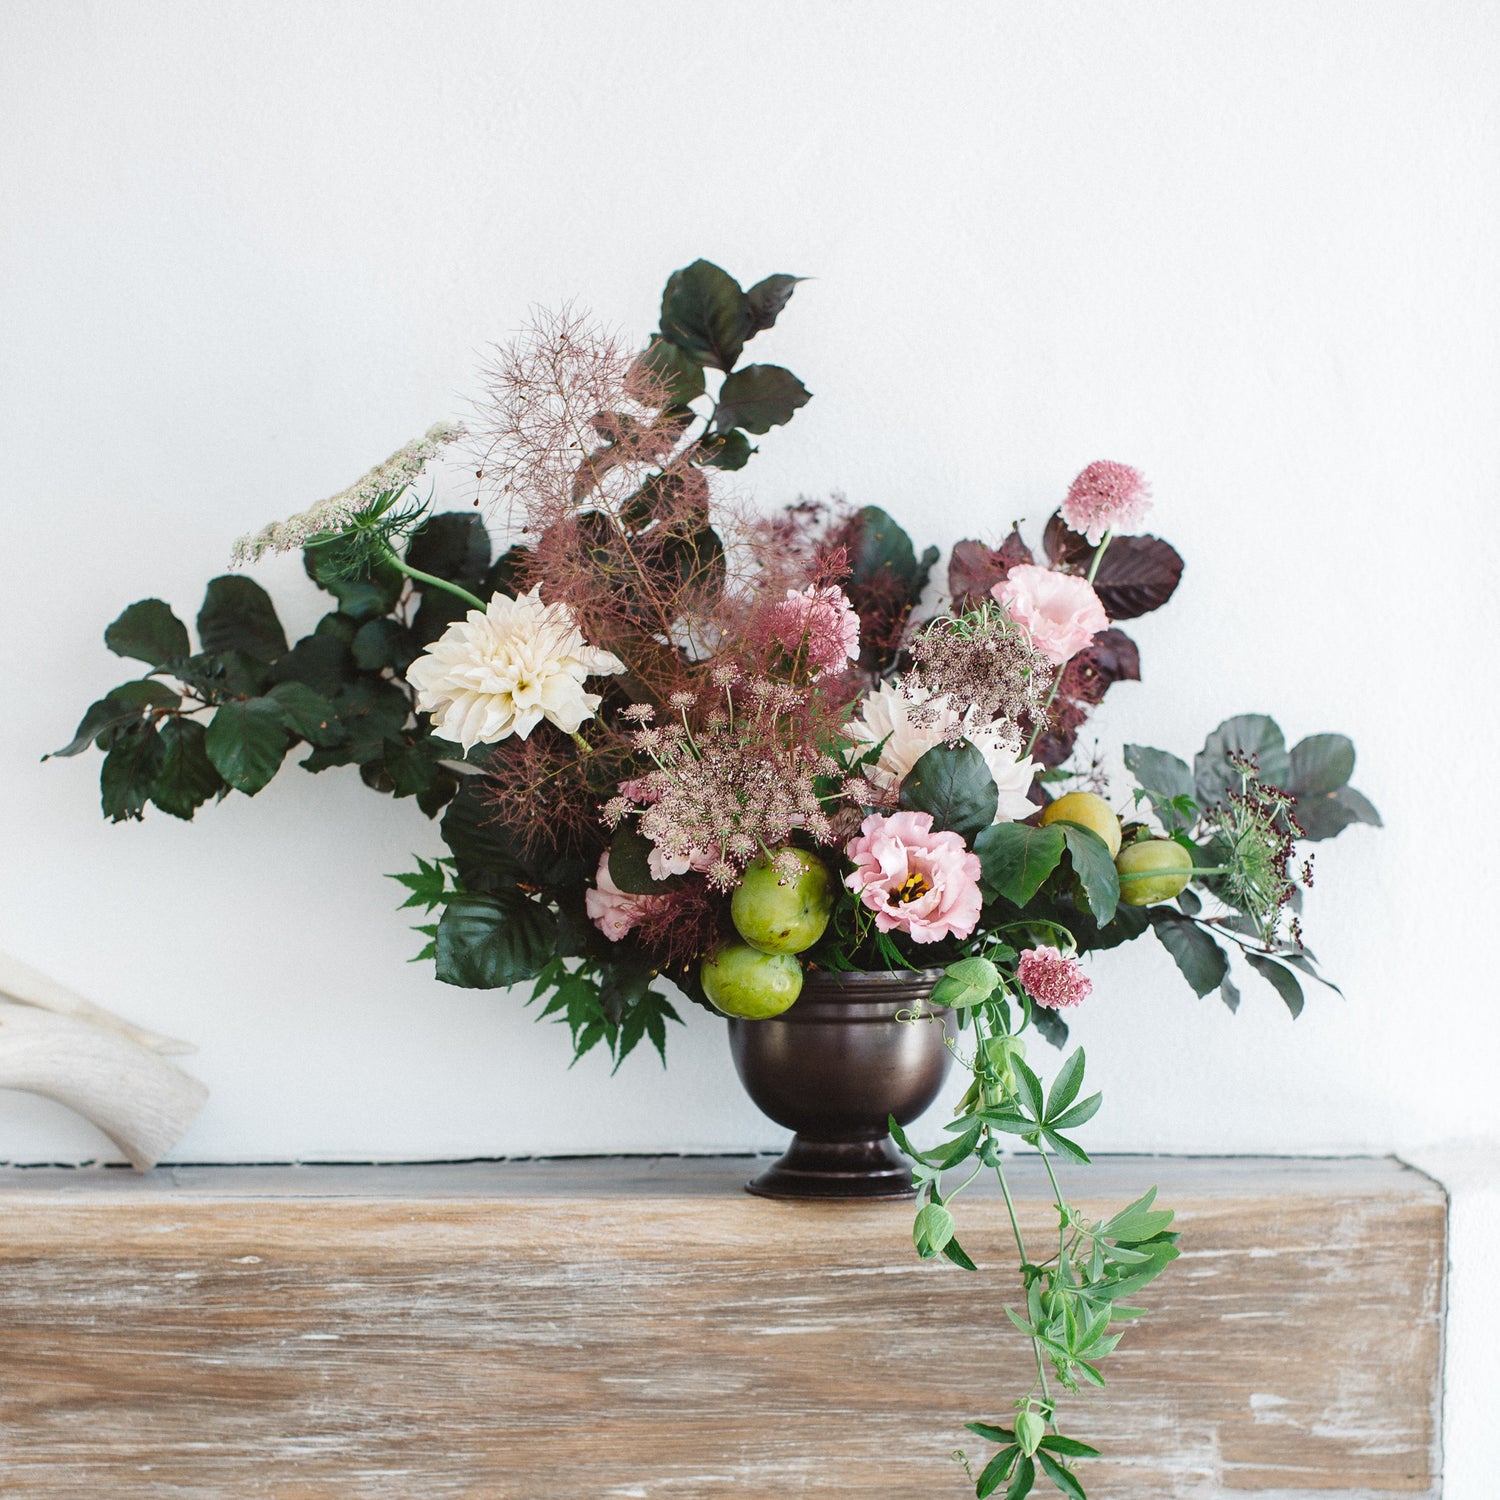 Statement floral arrangement with dahlias, smoke bush and pears designed for a Carmel resort